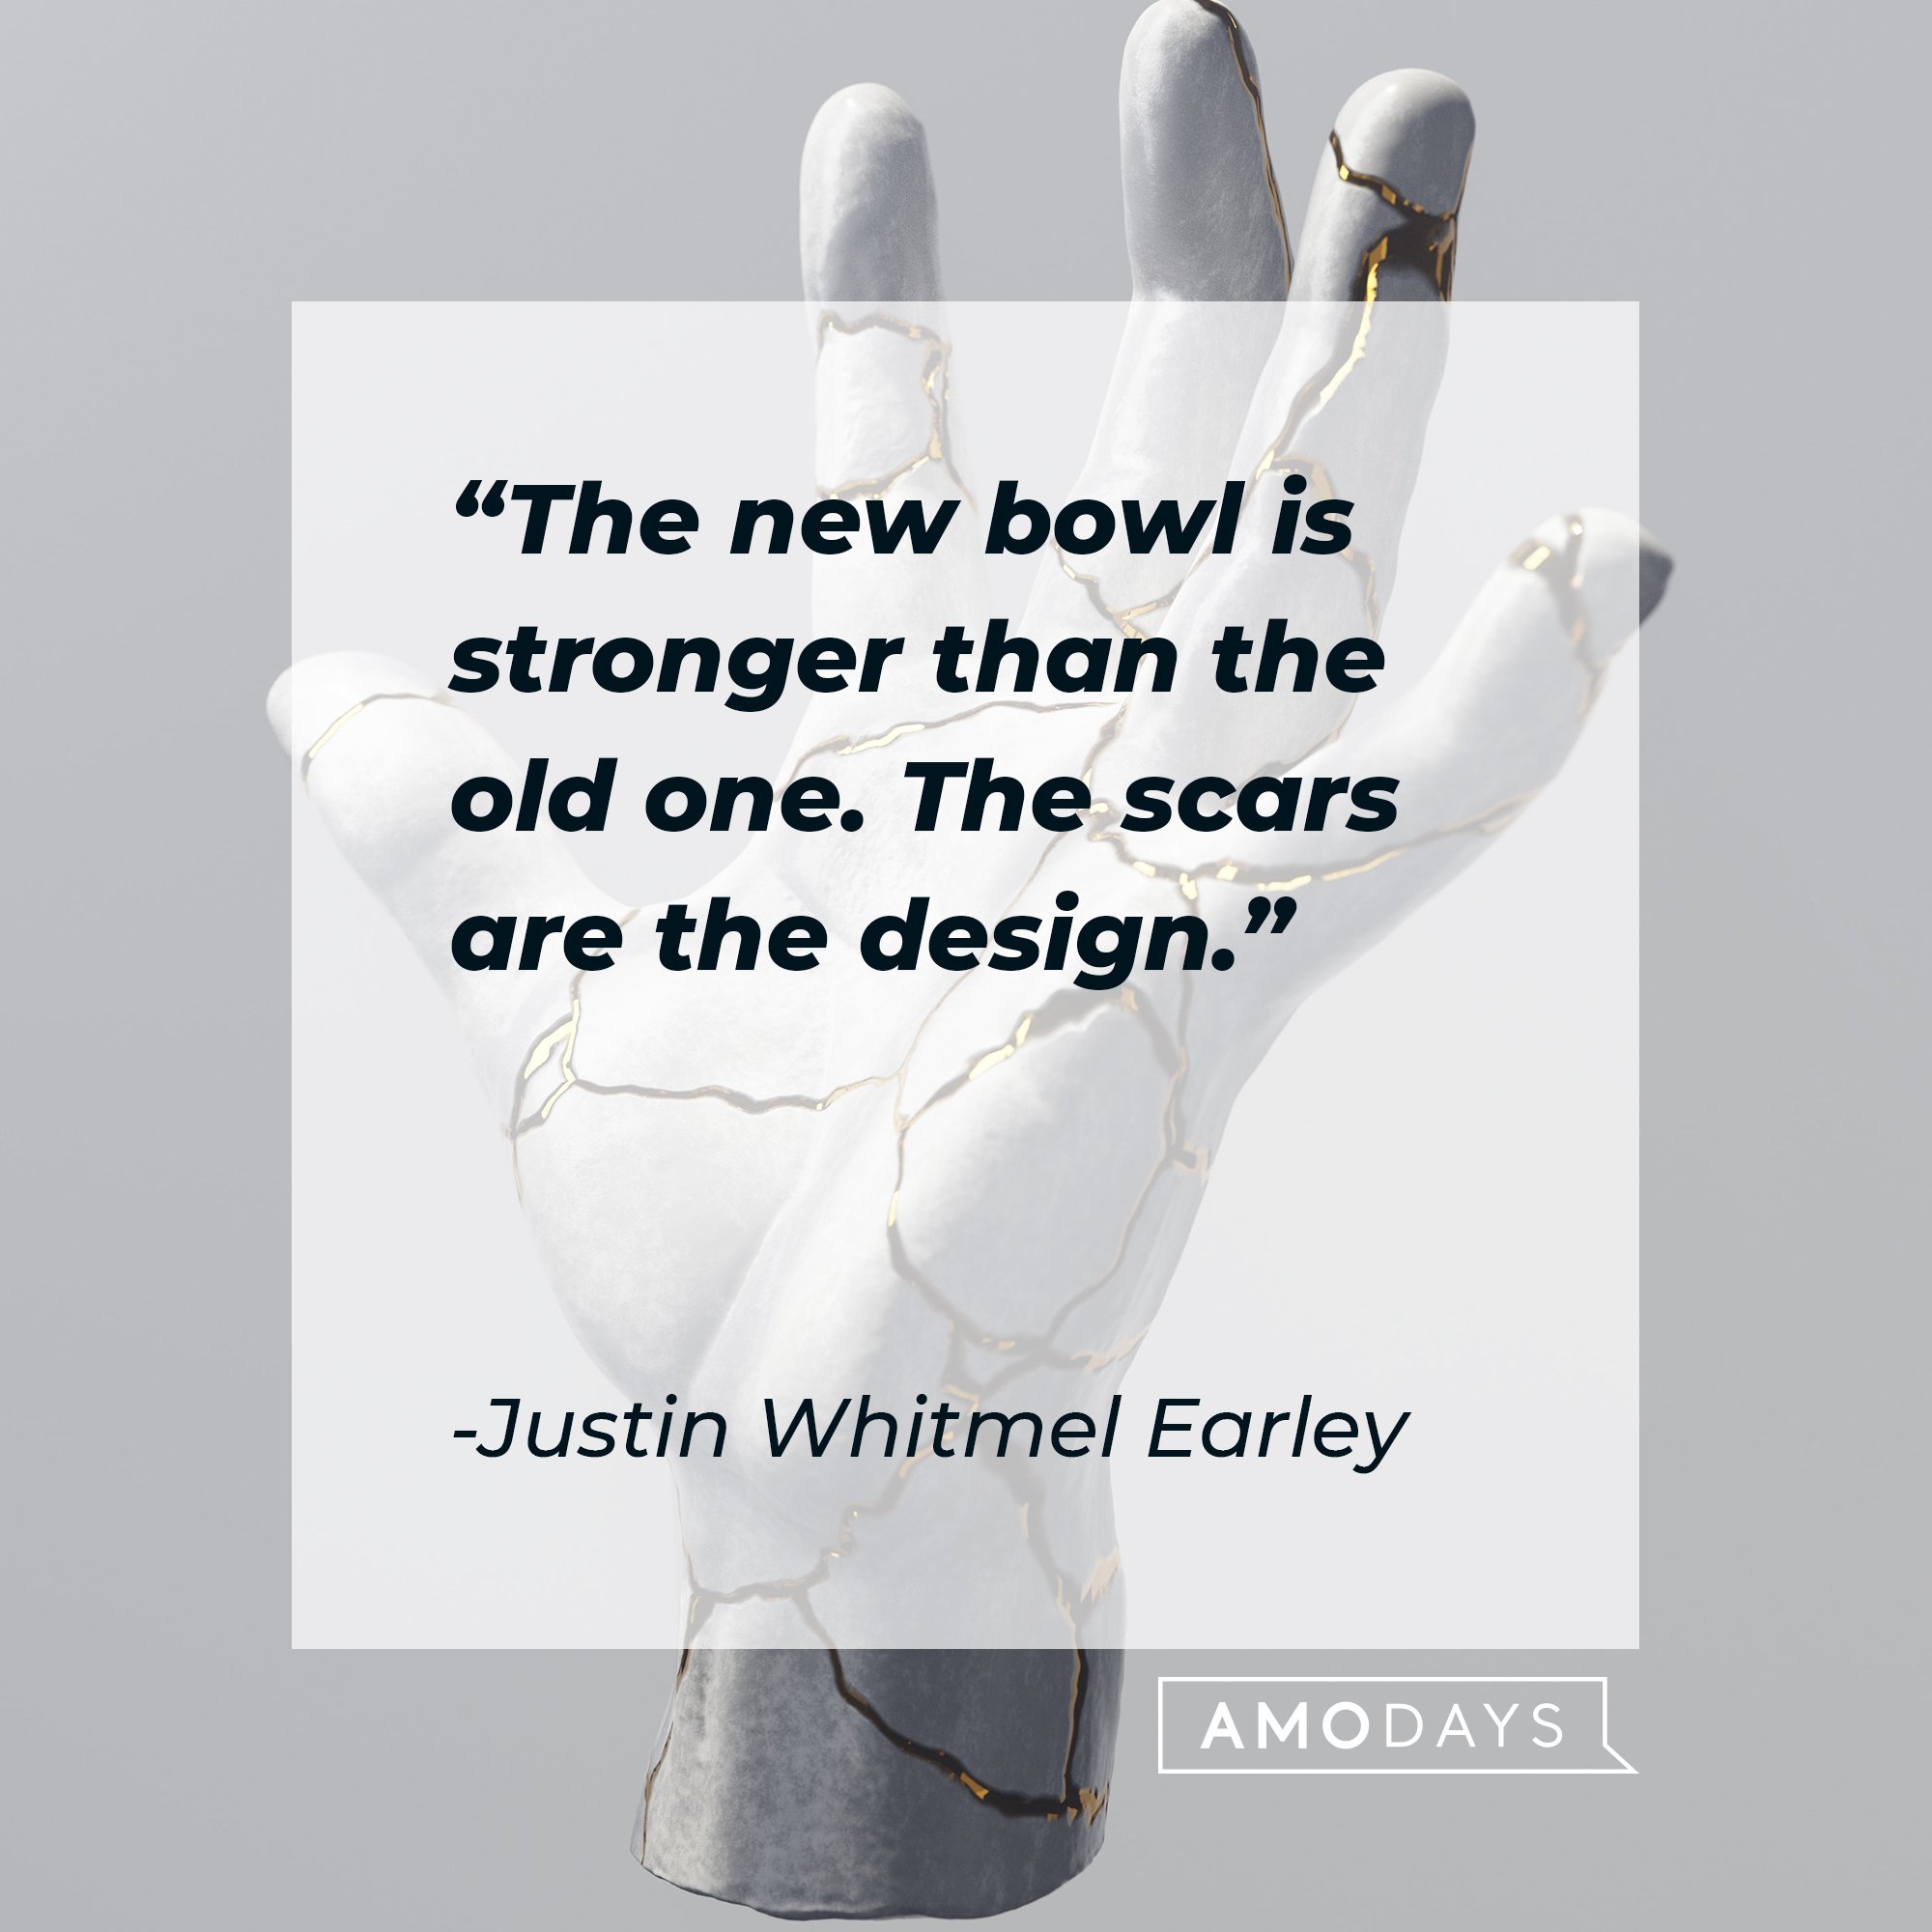 Justin Whitmel Earley’s quote: "The new bowl is stronger than the old one.  The scars are the design.” | Image: AmoDays